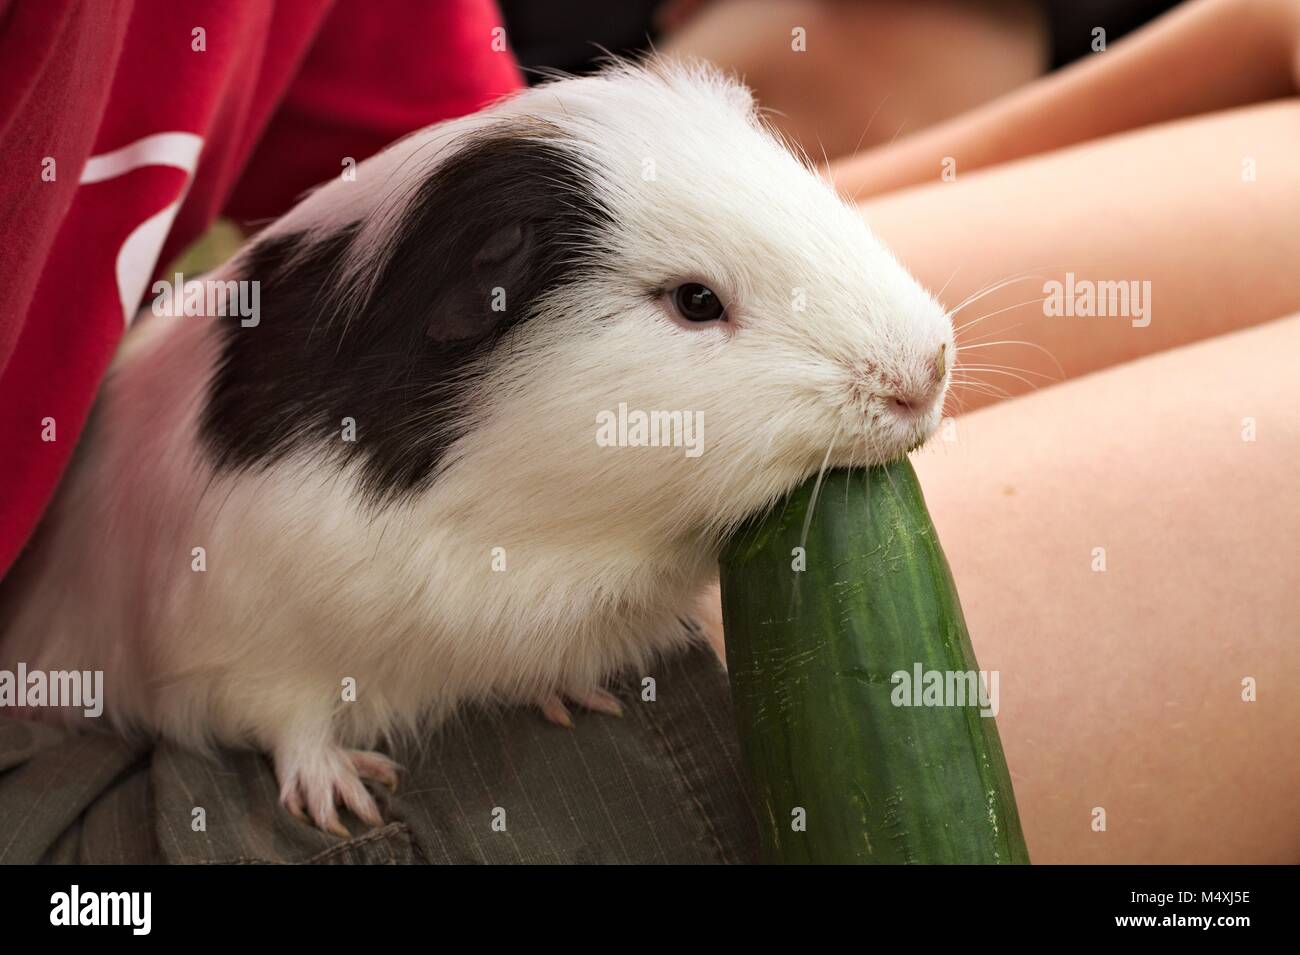 Black and white pet guinea pig sitting on a child's lap eating a large cucumber. Stock Photo